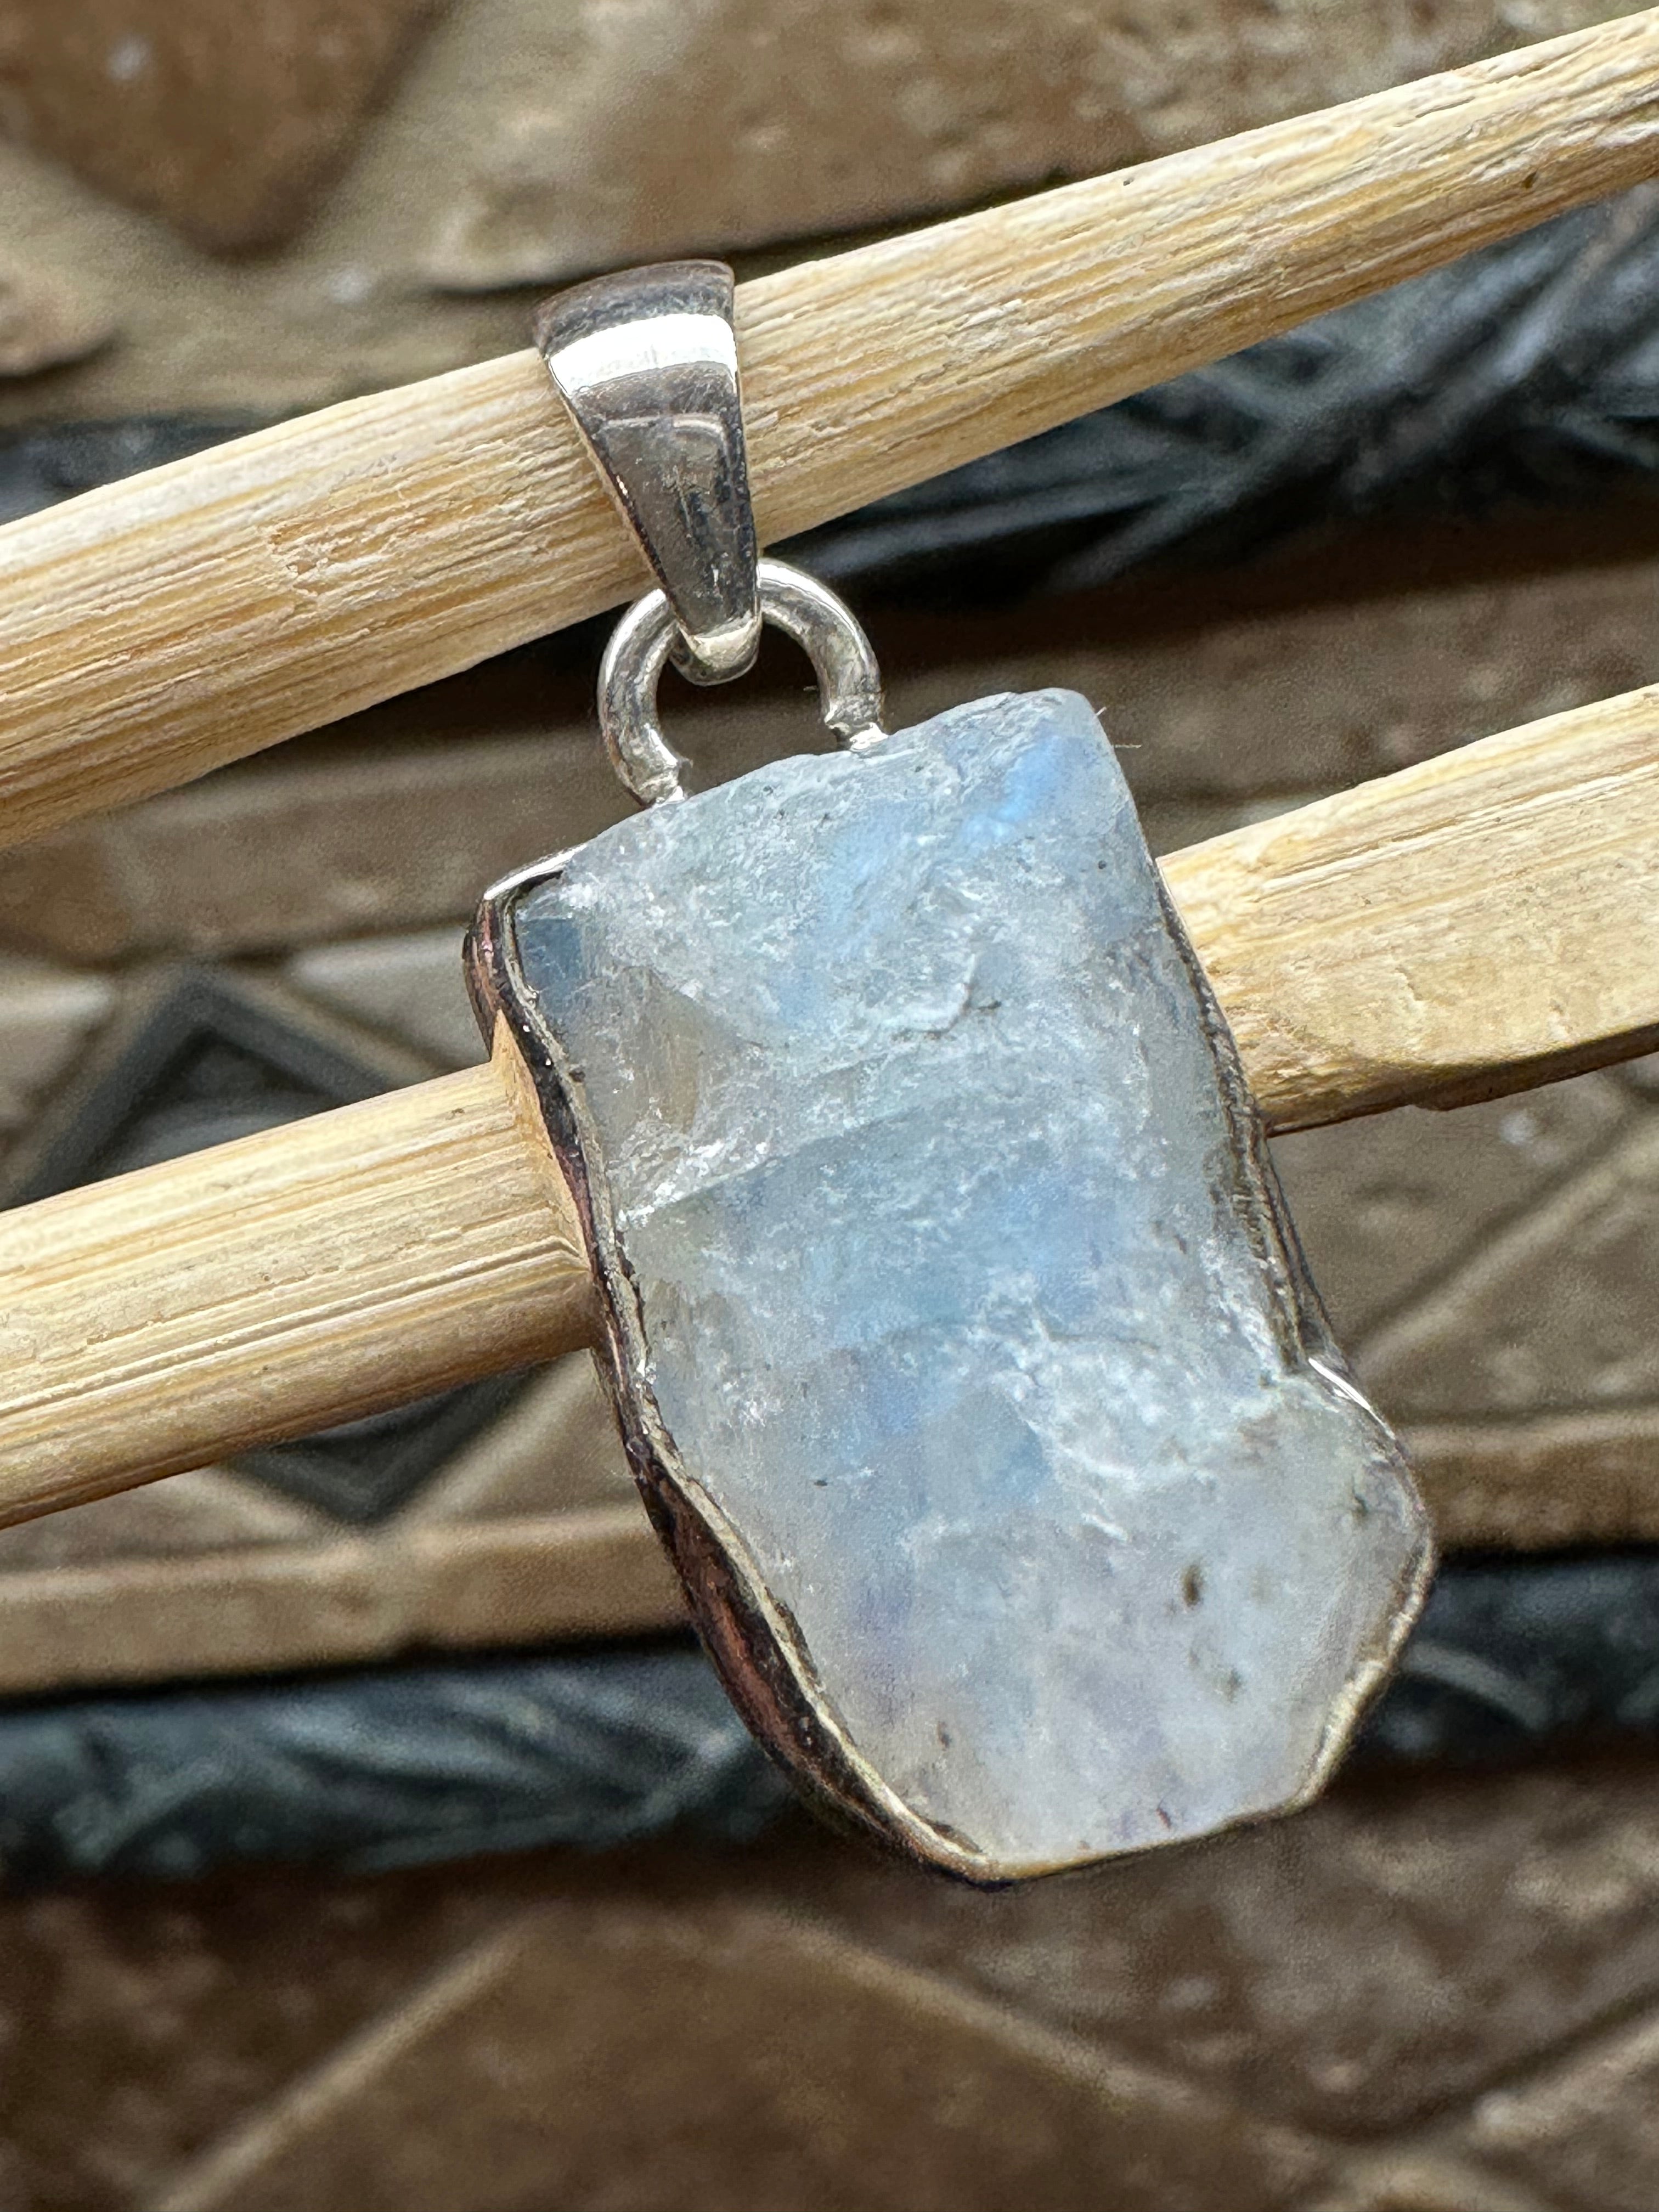 Natural Rainbow Moonstone 925 Solid Sterling Silver Unisex Pendant 35mm